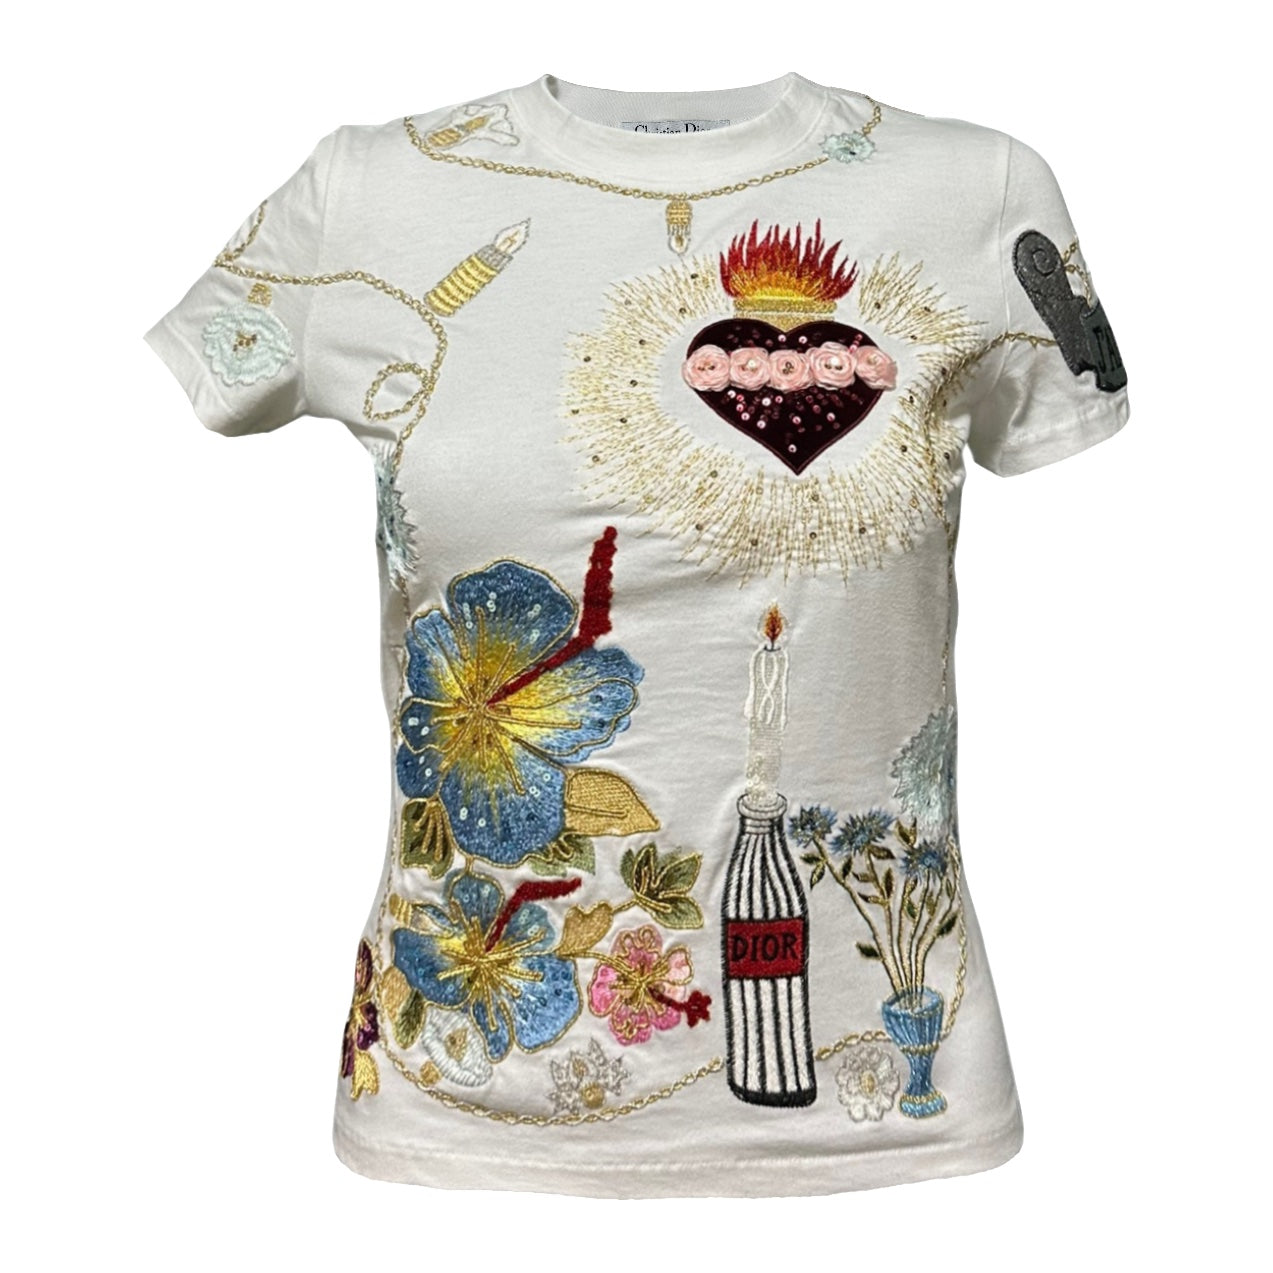 CHRISTIAN DIOR Spring Summer 2001 Embroidered T-Shirt